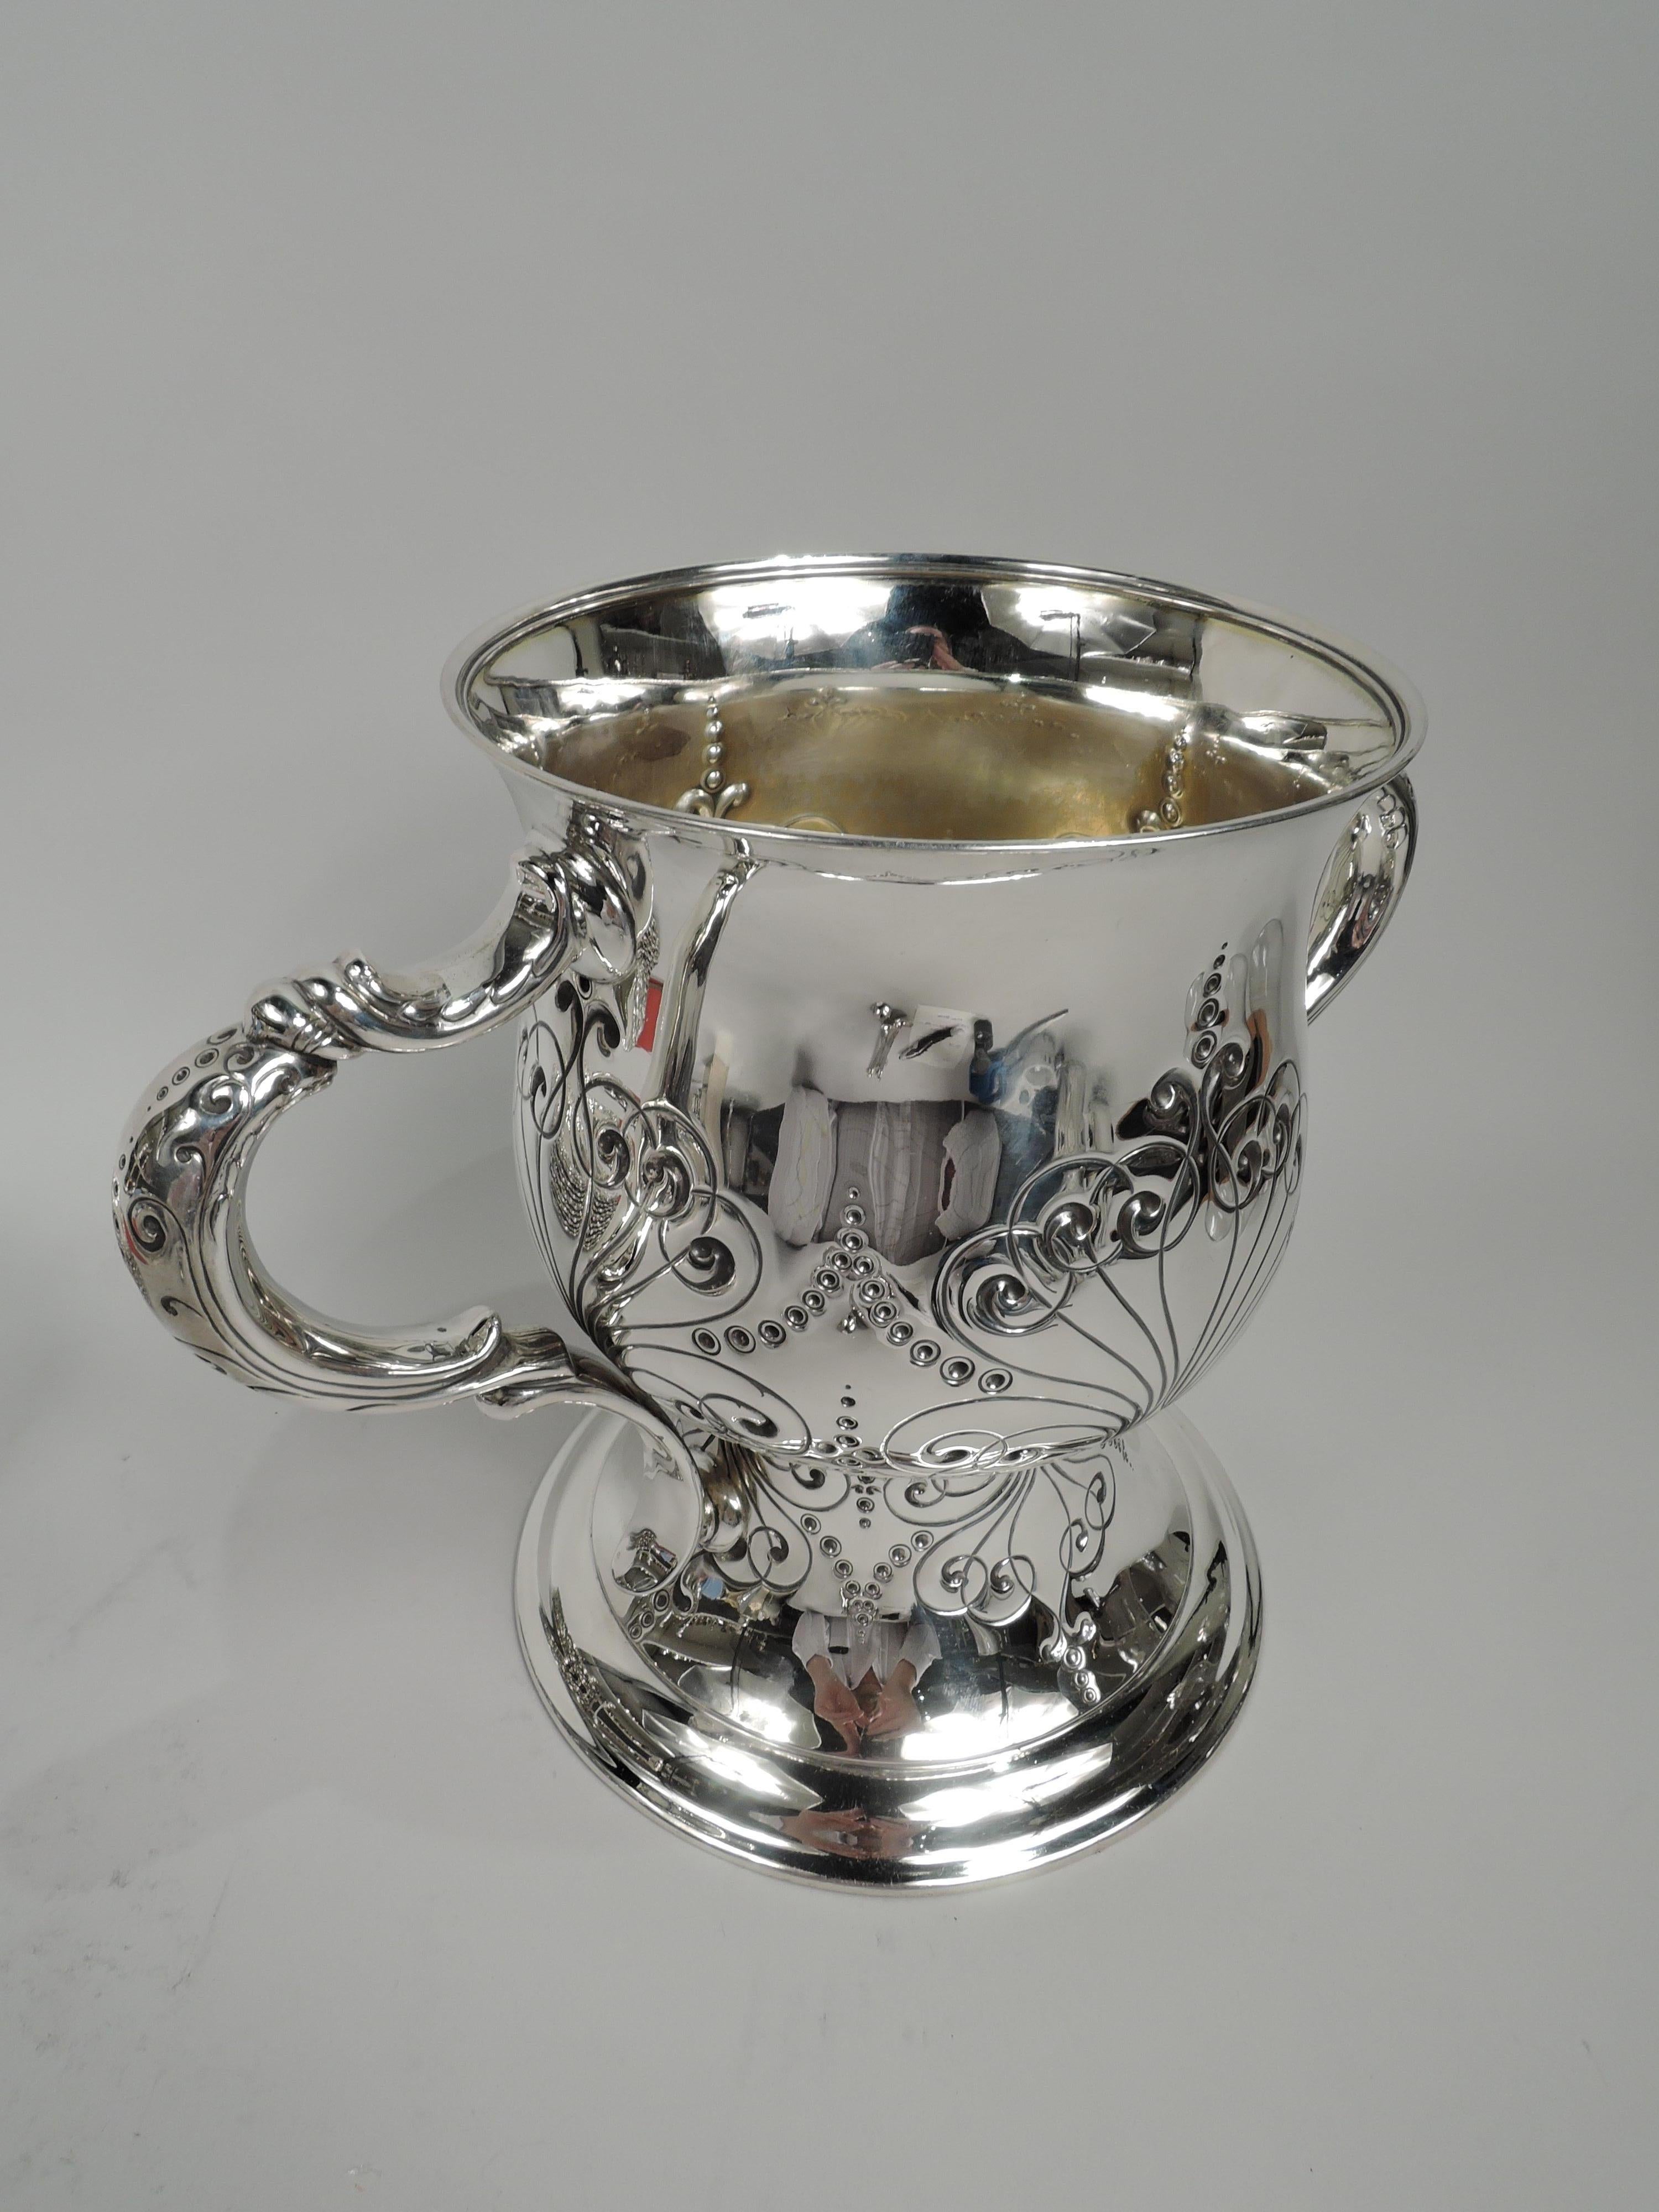 Art Nouveau sterling silver trophy cup. Made by Tiffany & Co. in New York. Urn on tall and spread foot; double-scroll side handles. Chased semi-abstract tendrils terminating in volute scrolls, garlands, and pendant flowers. A fluid, slightly